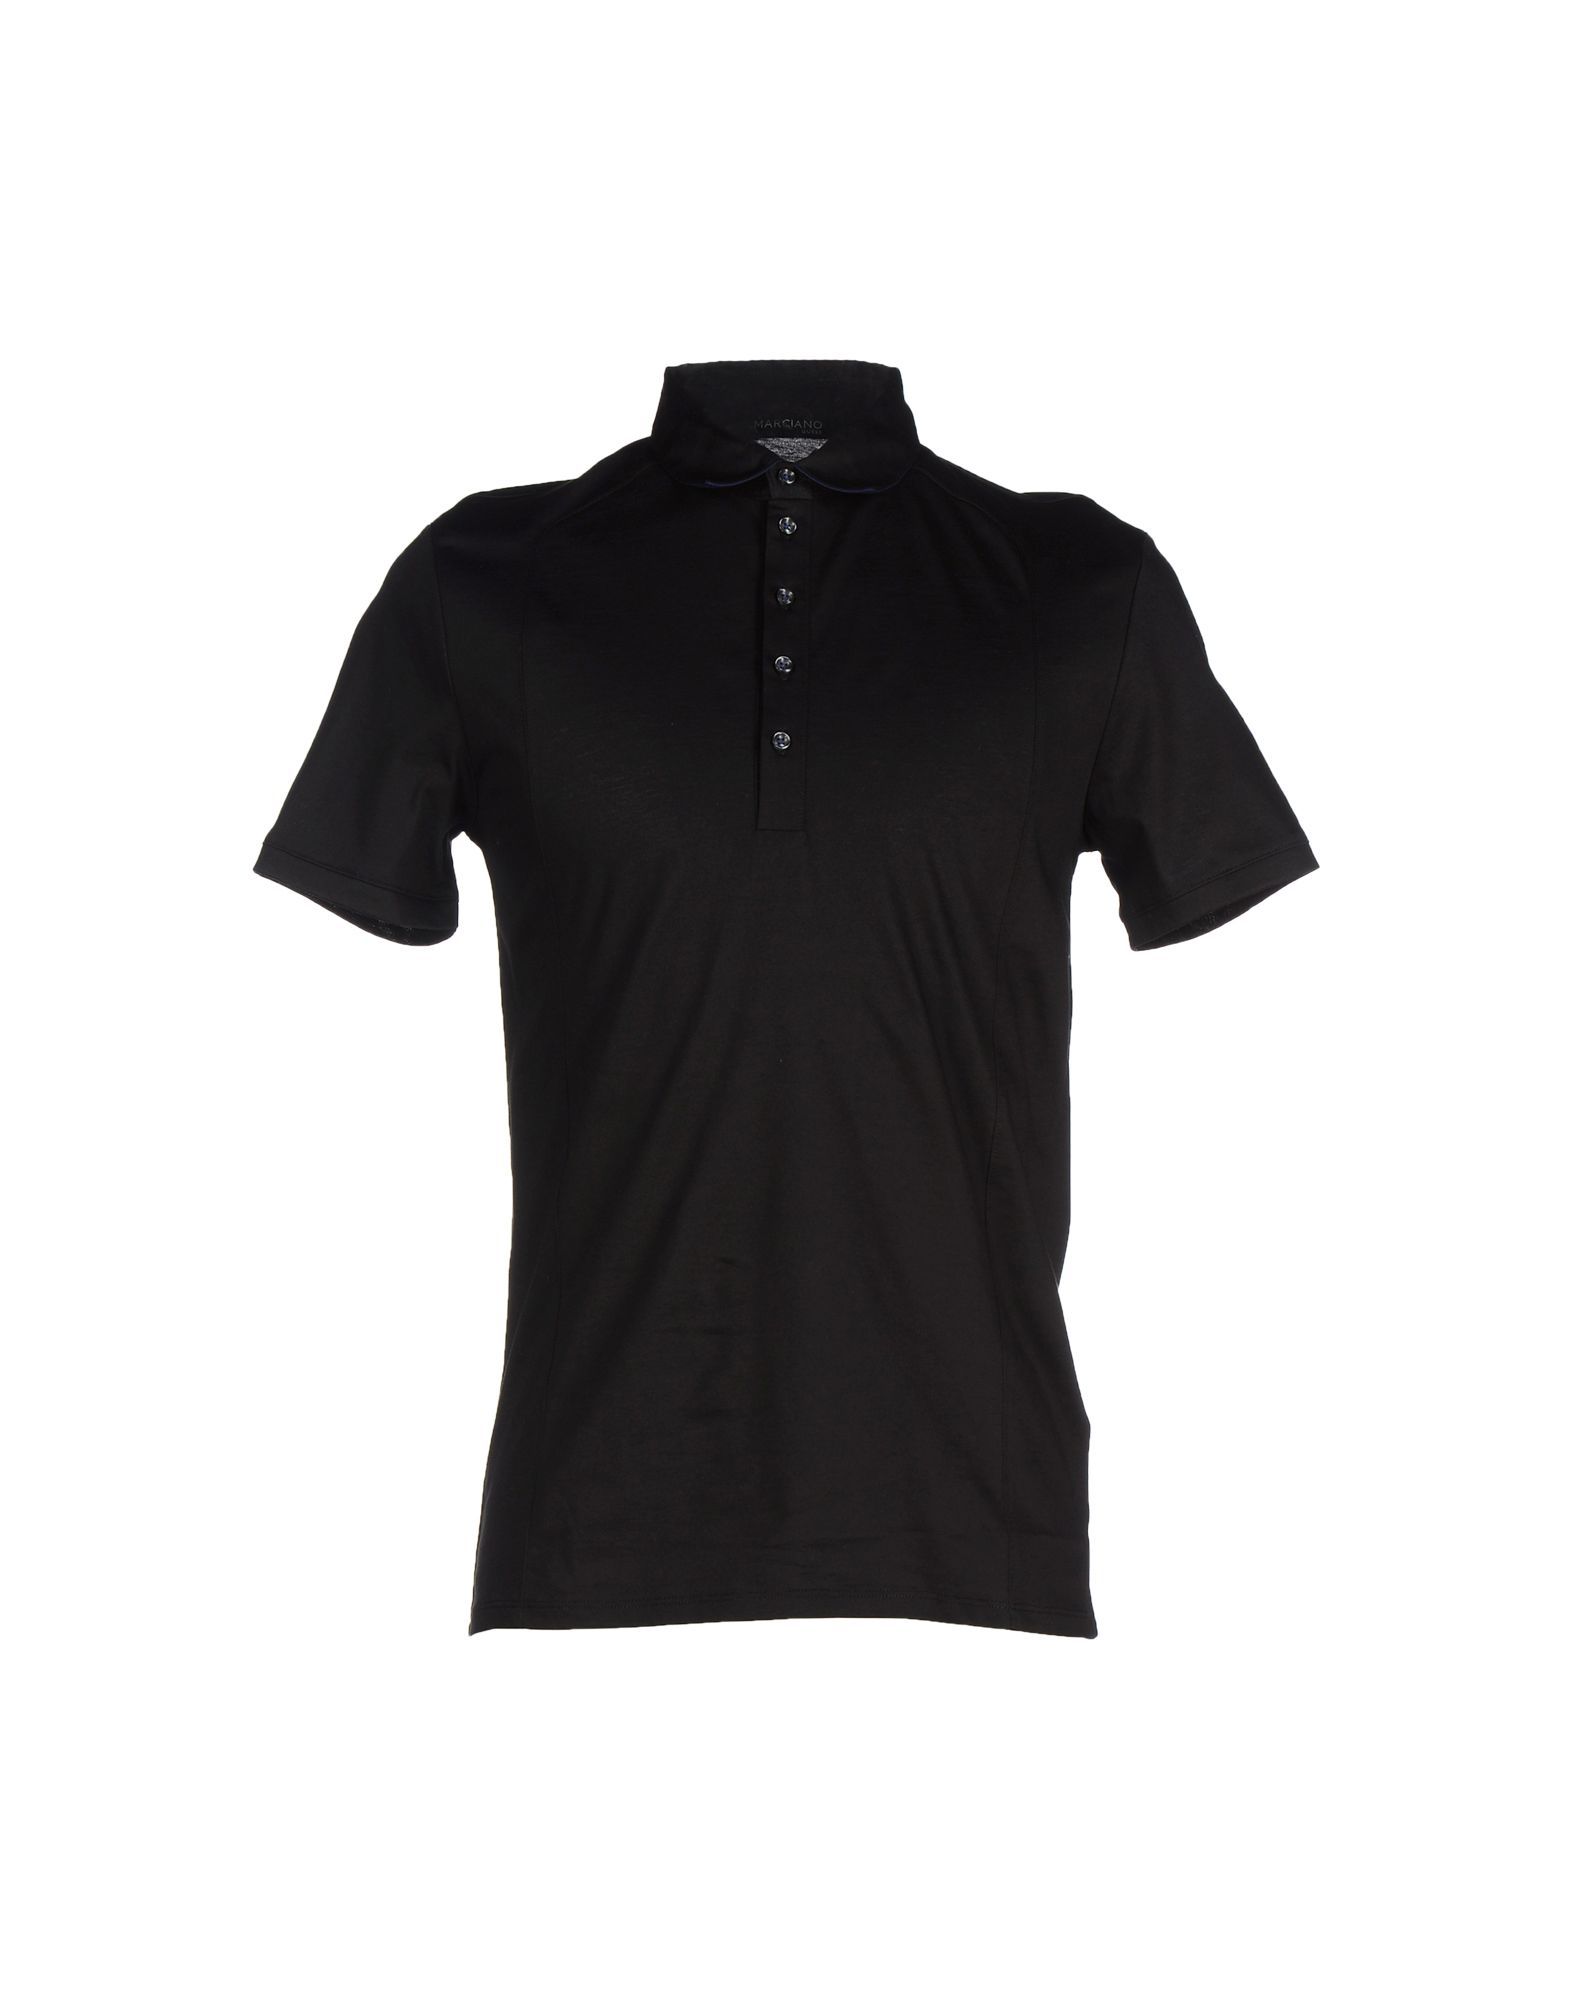 Guess Polo Shirt in Black for Men - Save 59% | Lyst